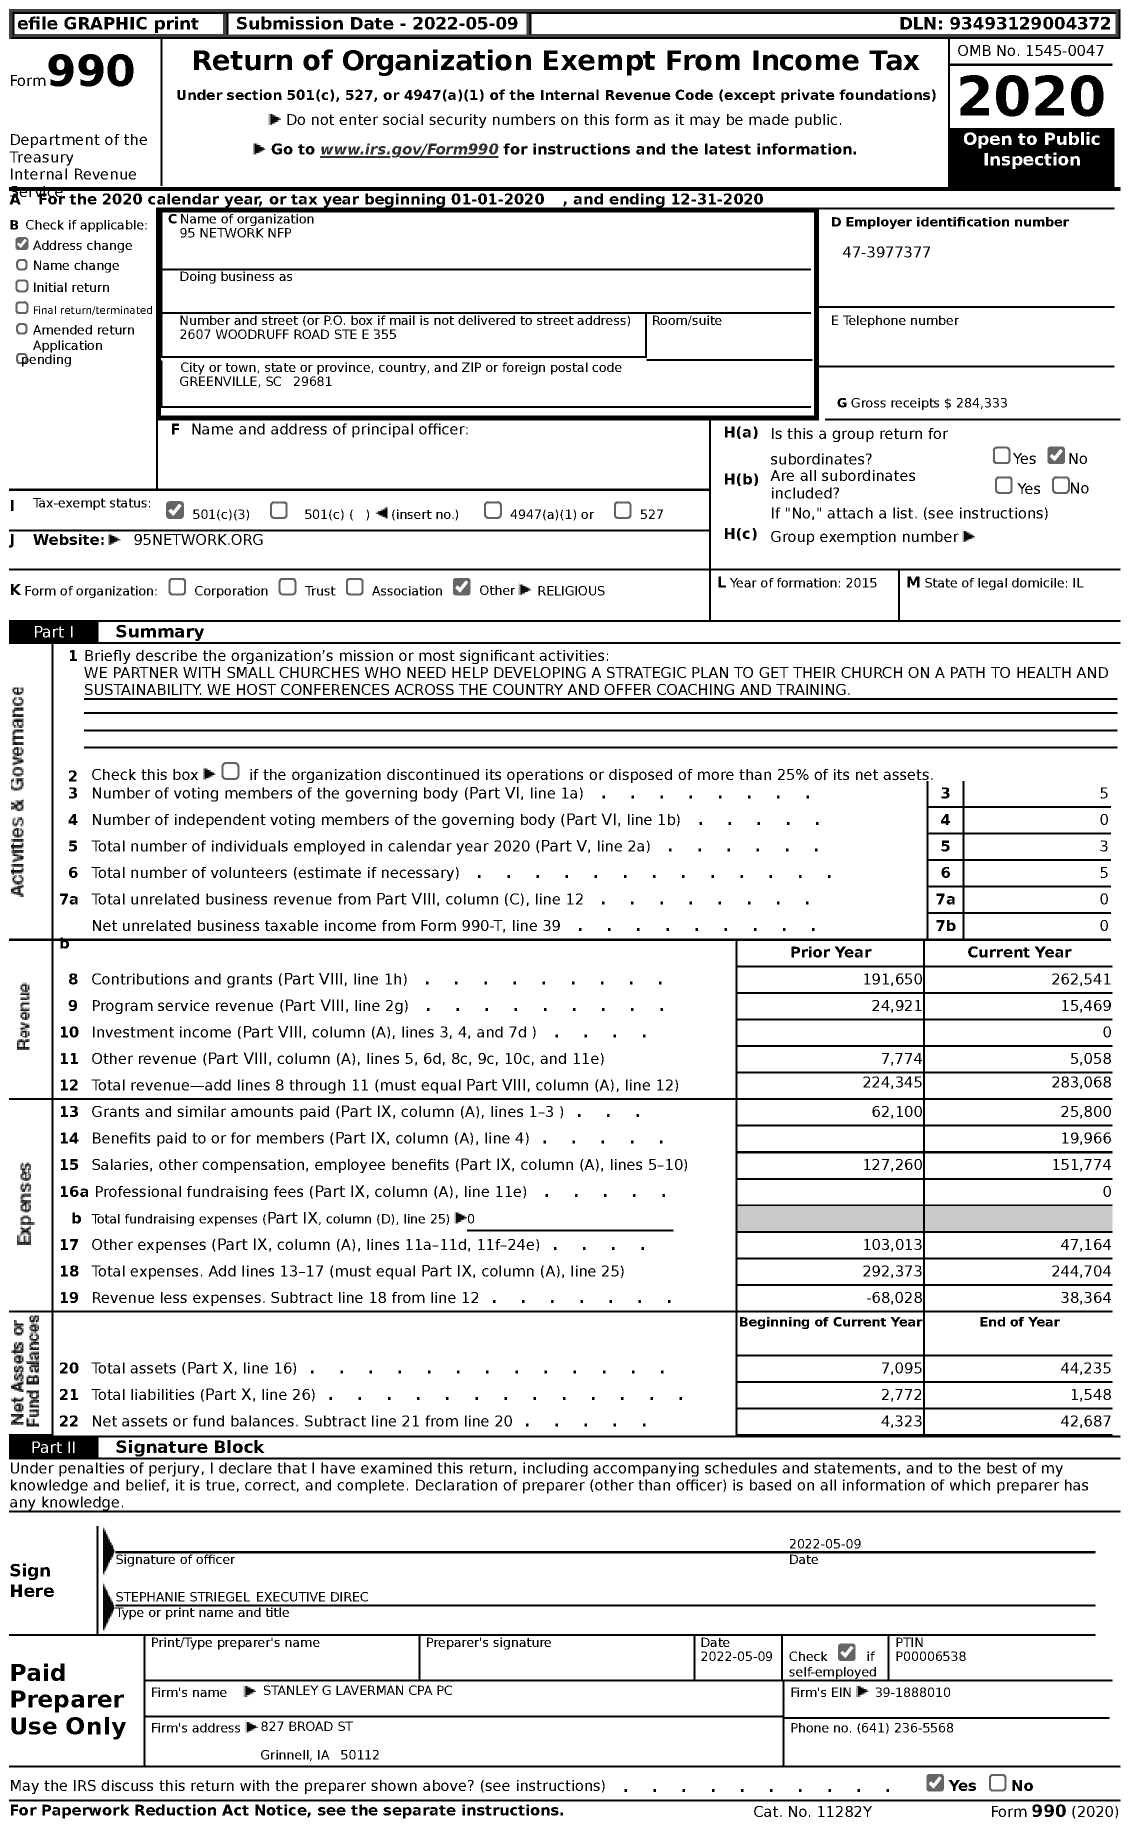 Image of first page of 2020 Form 990 for 95 Network NFP